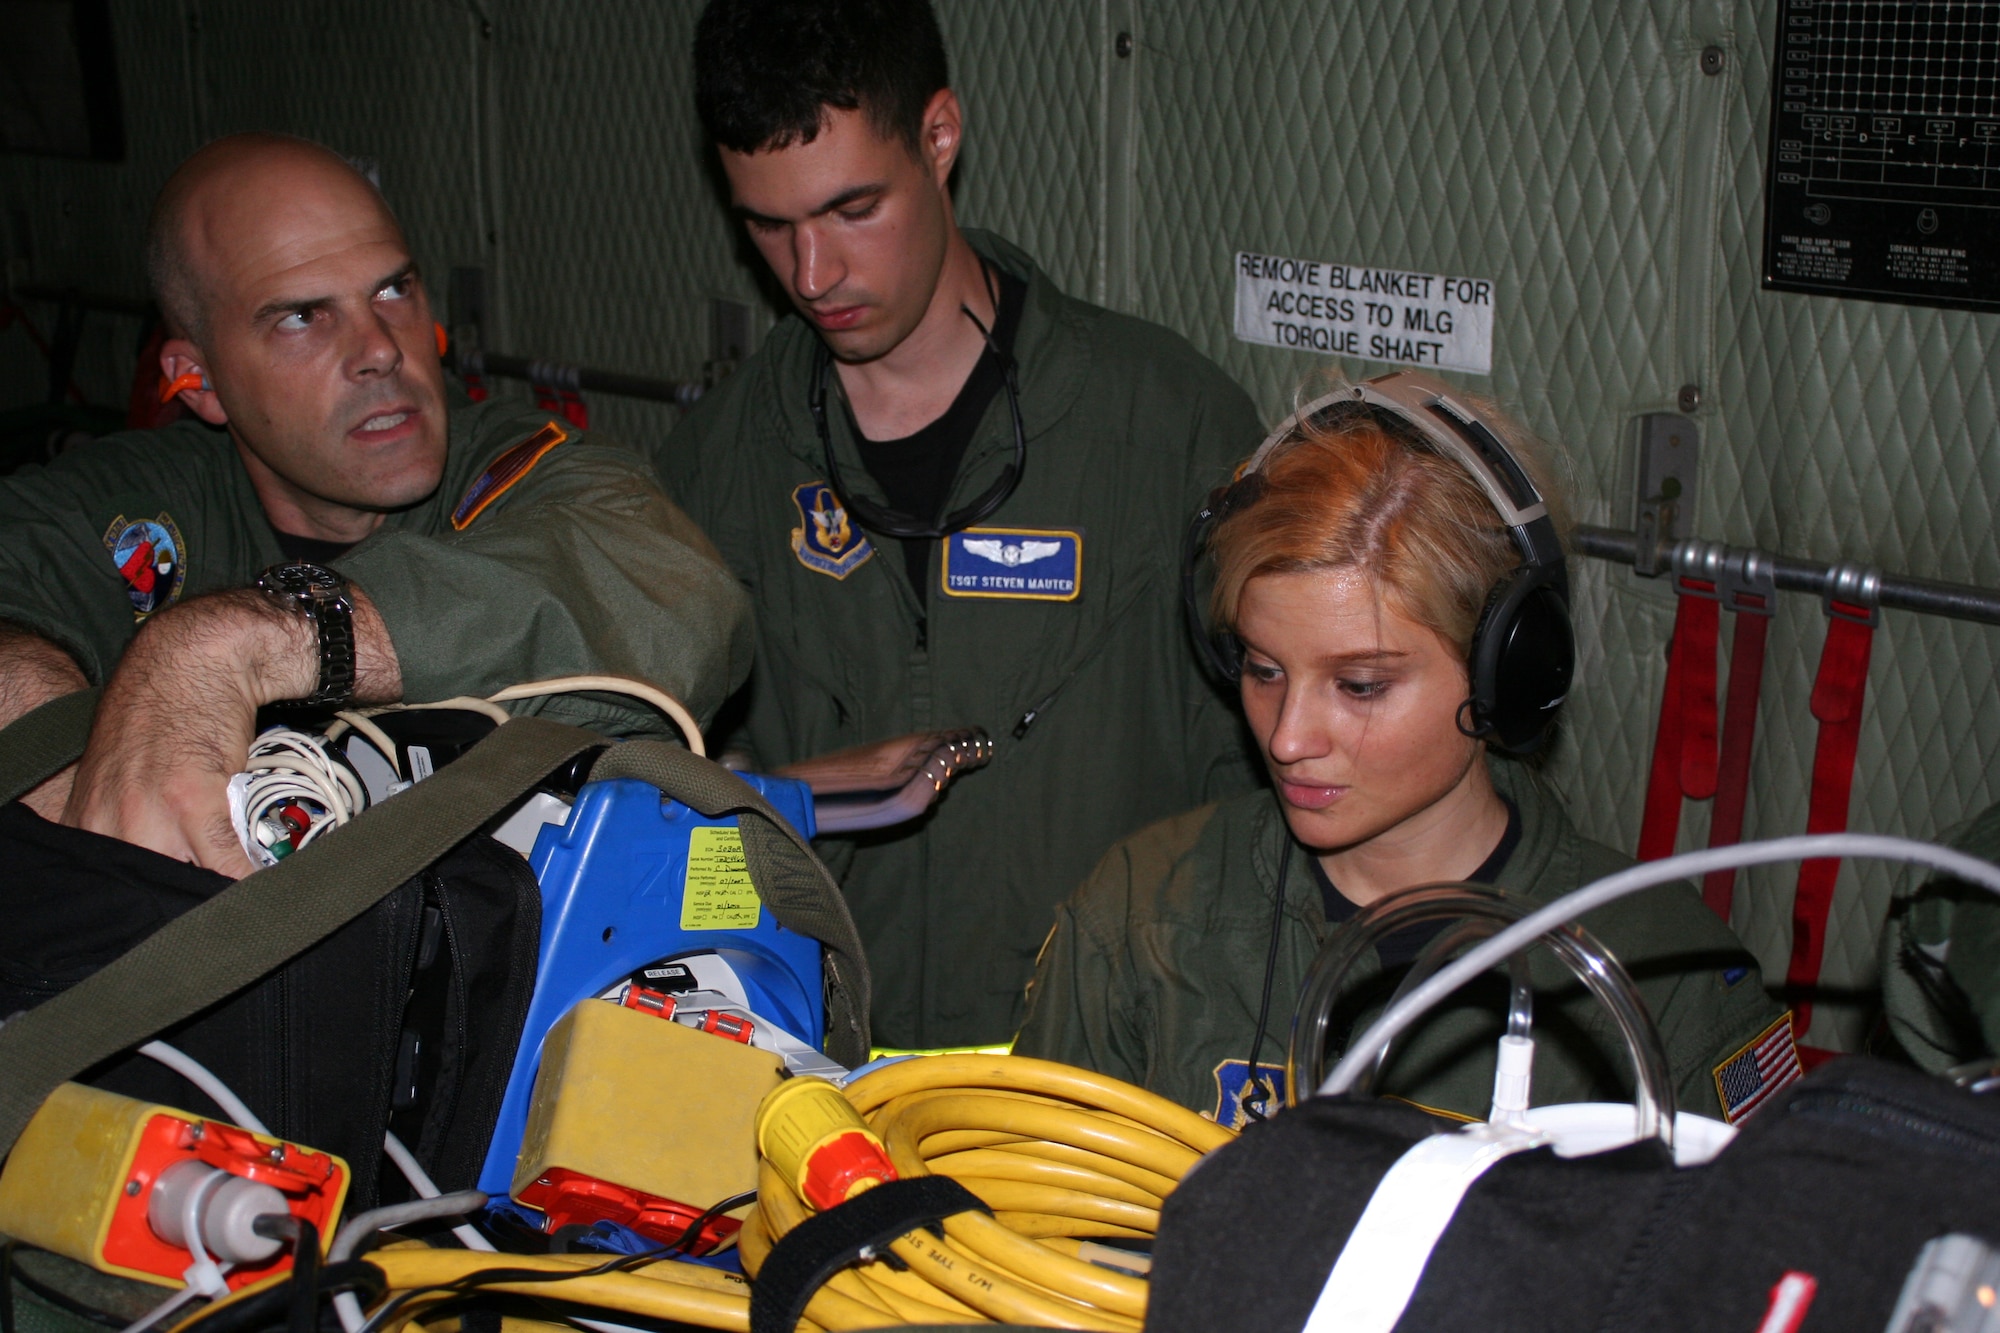 WRIGHT-PATTERSON AIR FORCE BASE, Ohio - Master Sgt.  Dean Keller and Tech. Sgt. Steven Mauter, both from the 445th Aeromedical Evacuation Squadron, along with 1st Lt. Mary Hummel, 911th Aeromedical Squadron, conduct an inventory and visual inspection of medical equipment prior to departing on a medical evacuation training flight. Sixteen reservists from AES participated in a three-day training event that involved loading and unloading patients and equipment onboard the aircraft and using simulated patients to run medical and aircraft emergency scenarios while in flight. (U. S. Air Force photo/Capt. Rodney McNany) 